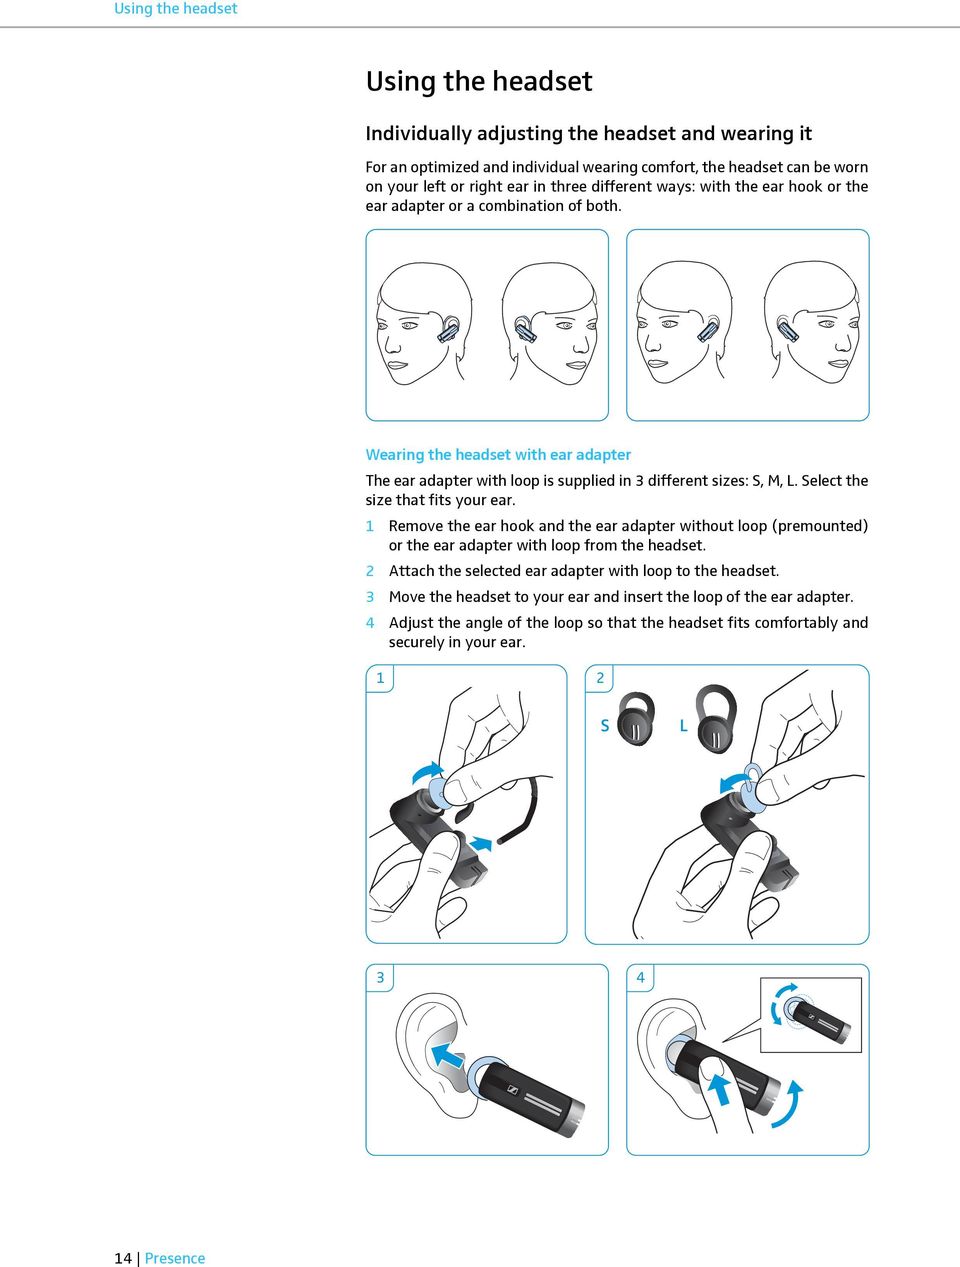 Select the size that fits your ear. 1 Remove the ear hook and the ear adapter without loop (premounted) or the ear adapter with loop from the headset.